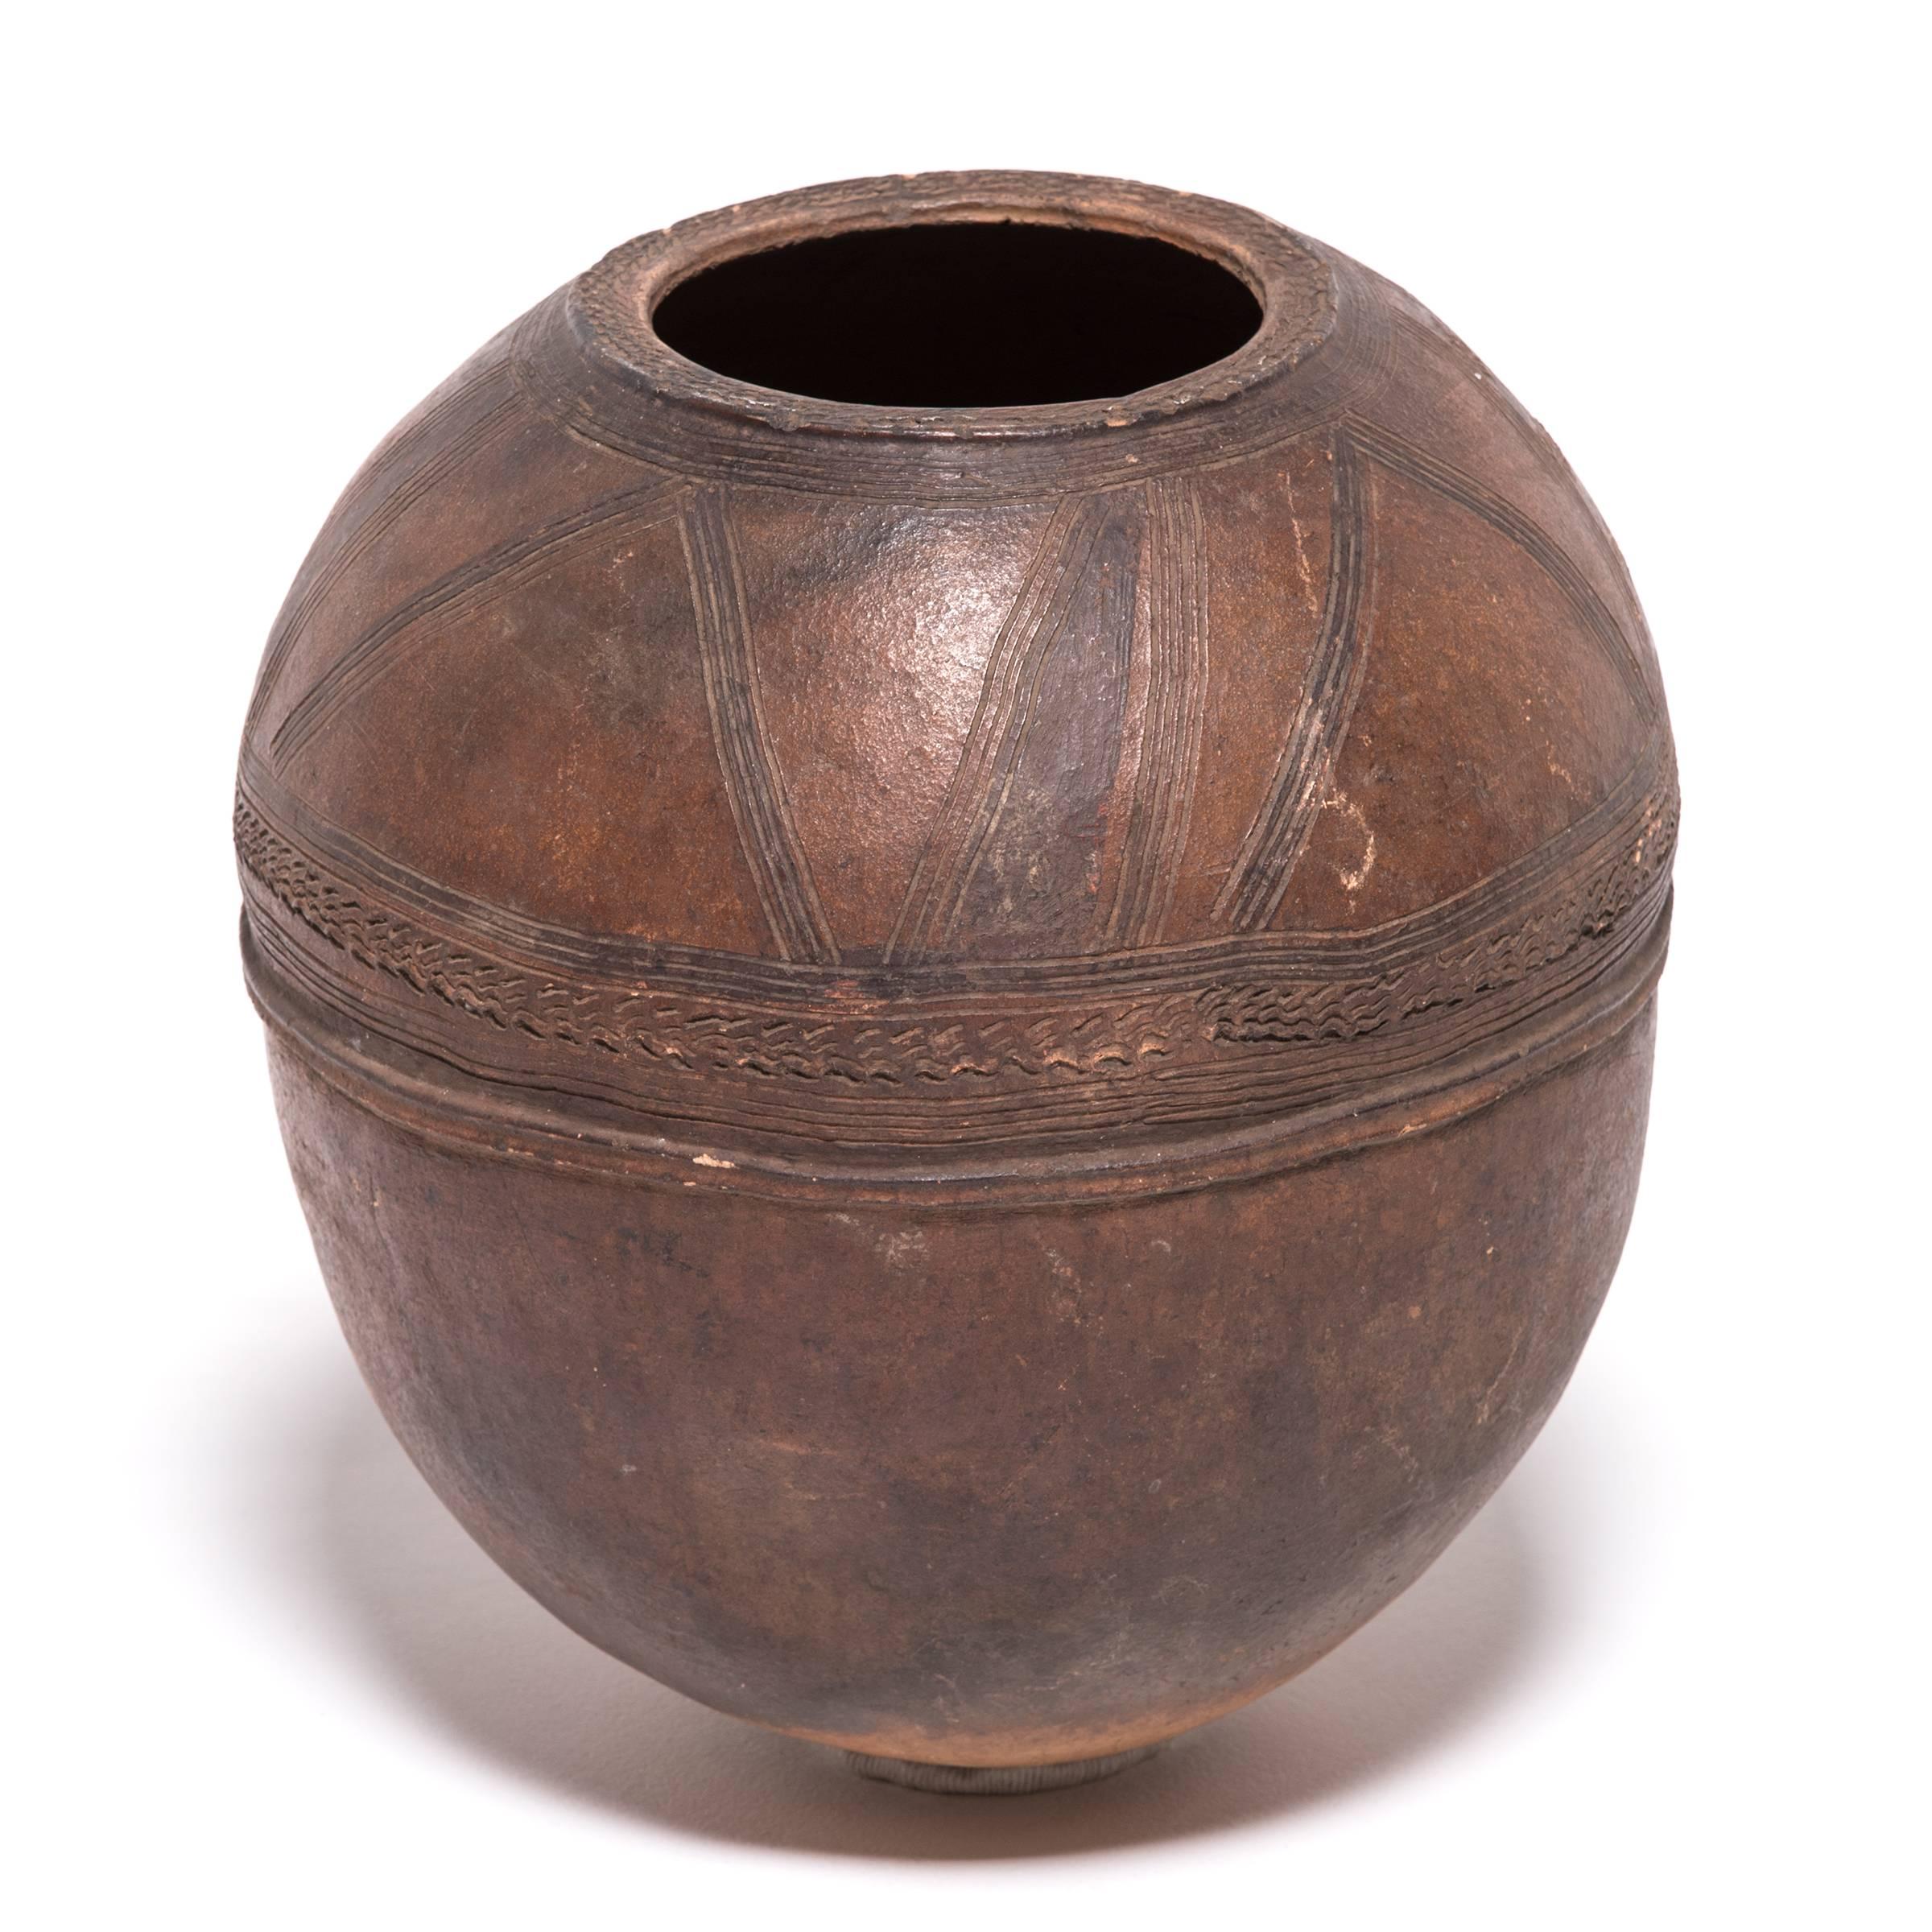 Elegantly embellished with geometric designs, this rounded water vessel is a fine example of Nupe ceramics. The vessel's many textures are not only decorative, they are also integral part of its functional design. The patterns and bands were etched